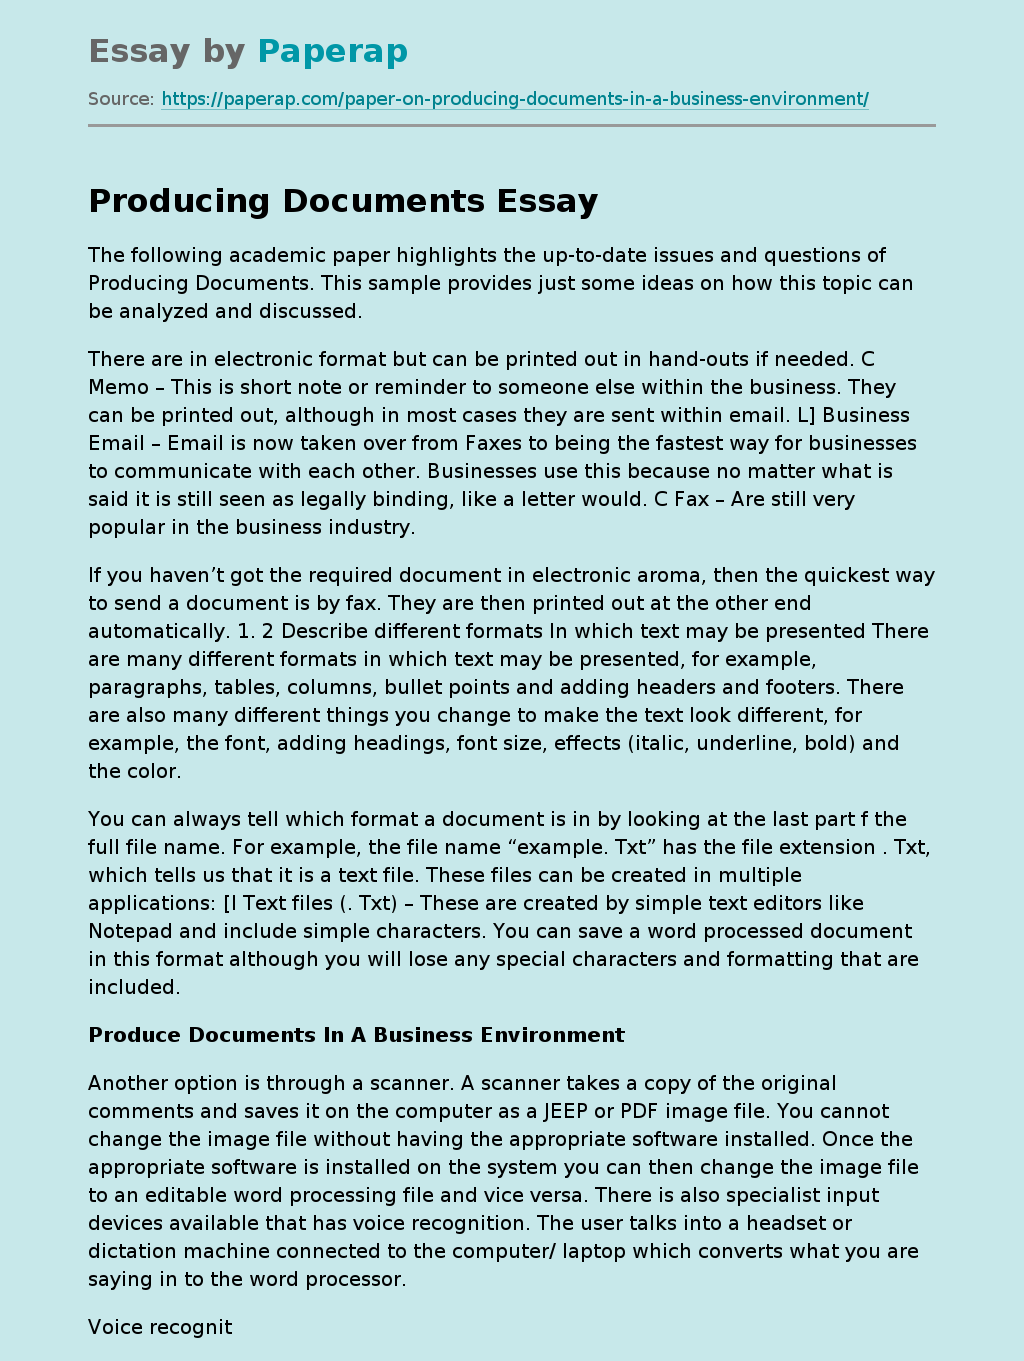 Producing Documents